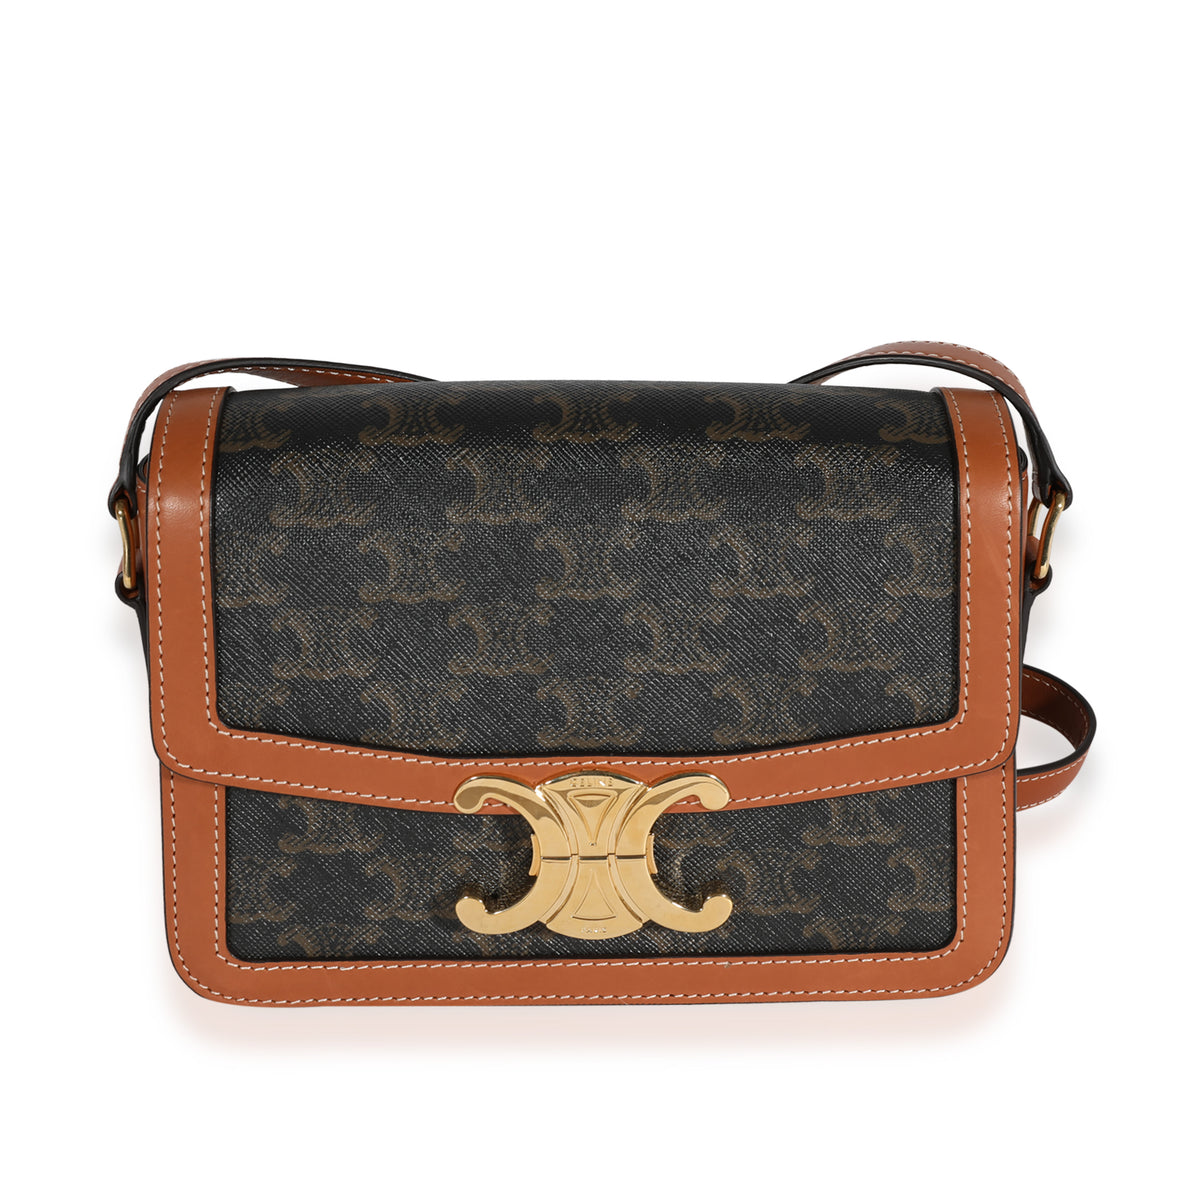 Celine - Belt Bag Triomphe Belt in Triomphe Canvas and Calfskin Leather - Brown - Size : 70 - for Women